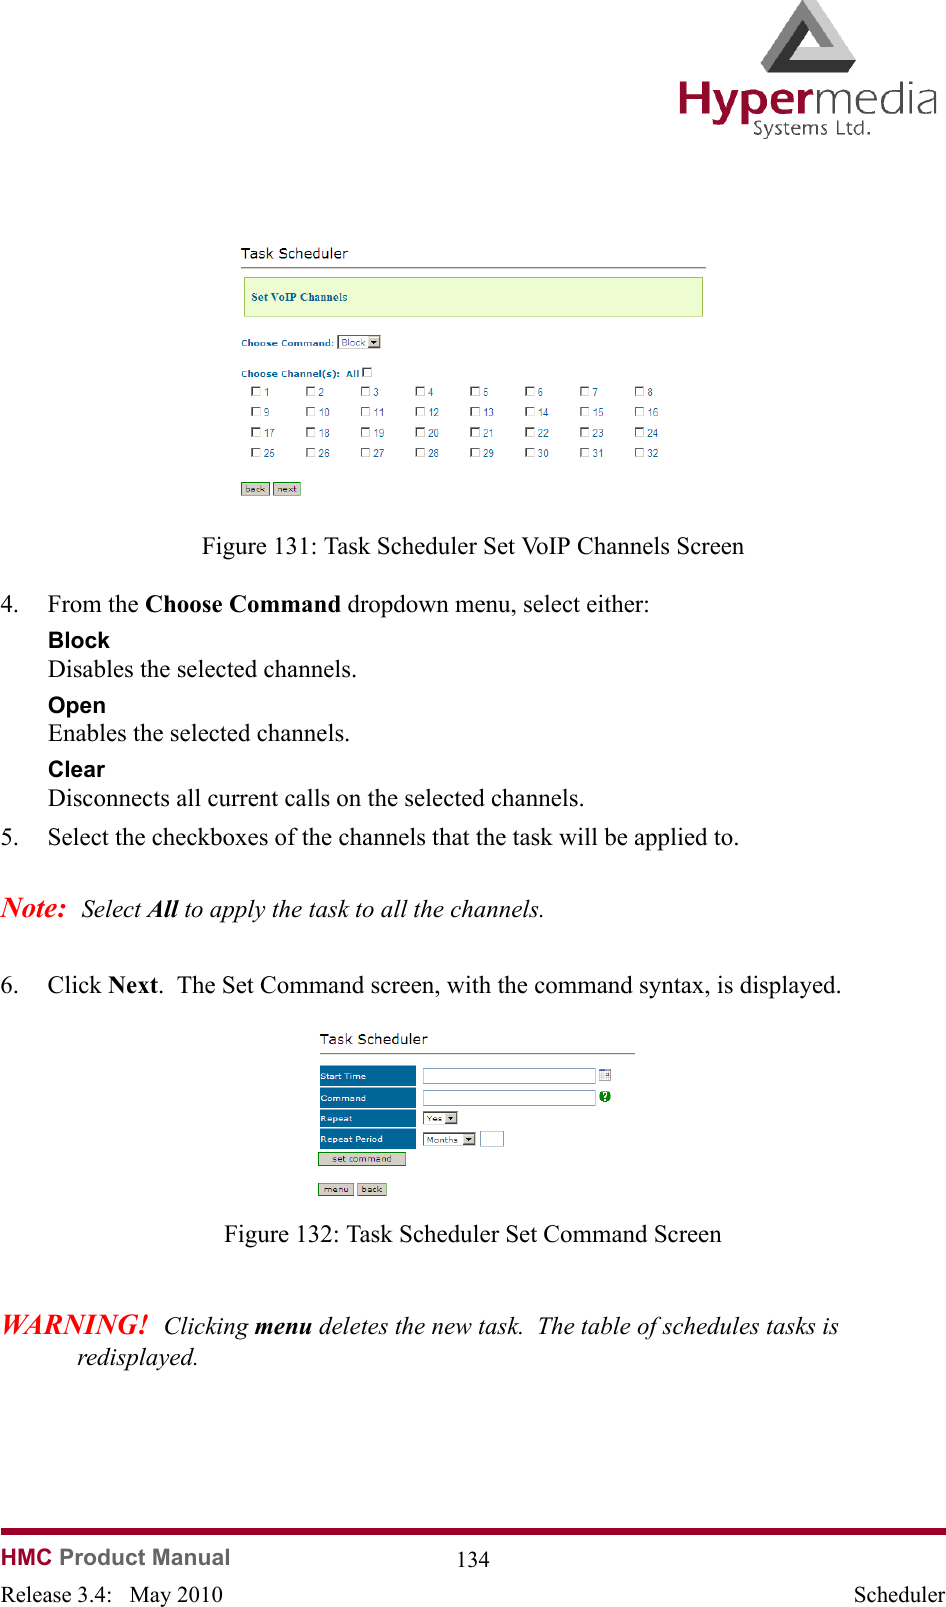   HMC Product Manual  134Release 3.4:   May 2010 Scheduler              Figure 131: Task Scheduler Set VoIP Channels Screen4. From the Choose Command dropdown menu, select either:BlockDisables the selected channels.OpenEnables the selected channels.ClearDisconnects all current calls on the selected channels.5. Select the checkboxes of the channels that the task will be applied to.Note:  Select All to apply the task to all the channels.6. Click Next.  The Set Command screen, with the command syntax, is displayed.              Figure 132: Task Scheduler Set Command ScreenWARNING!  Clicking menu deletes the new task.  The table of schedules tasks is redisplayed.